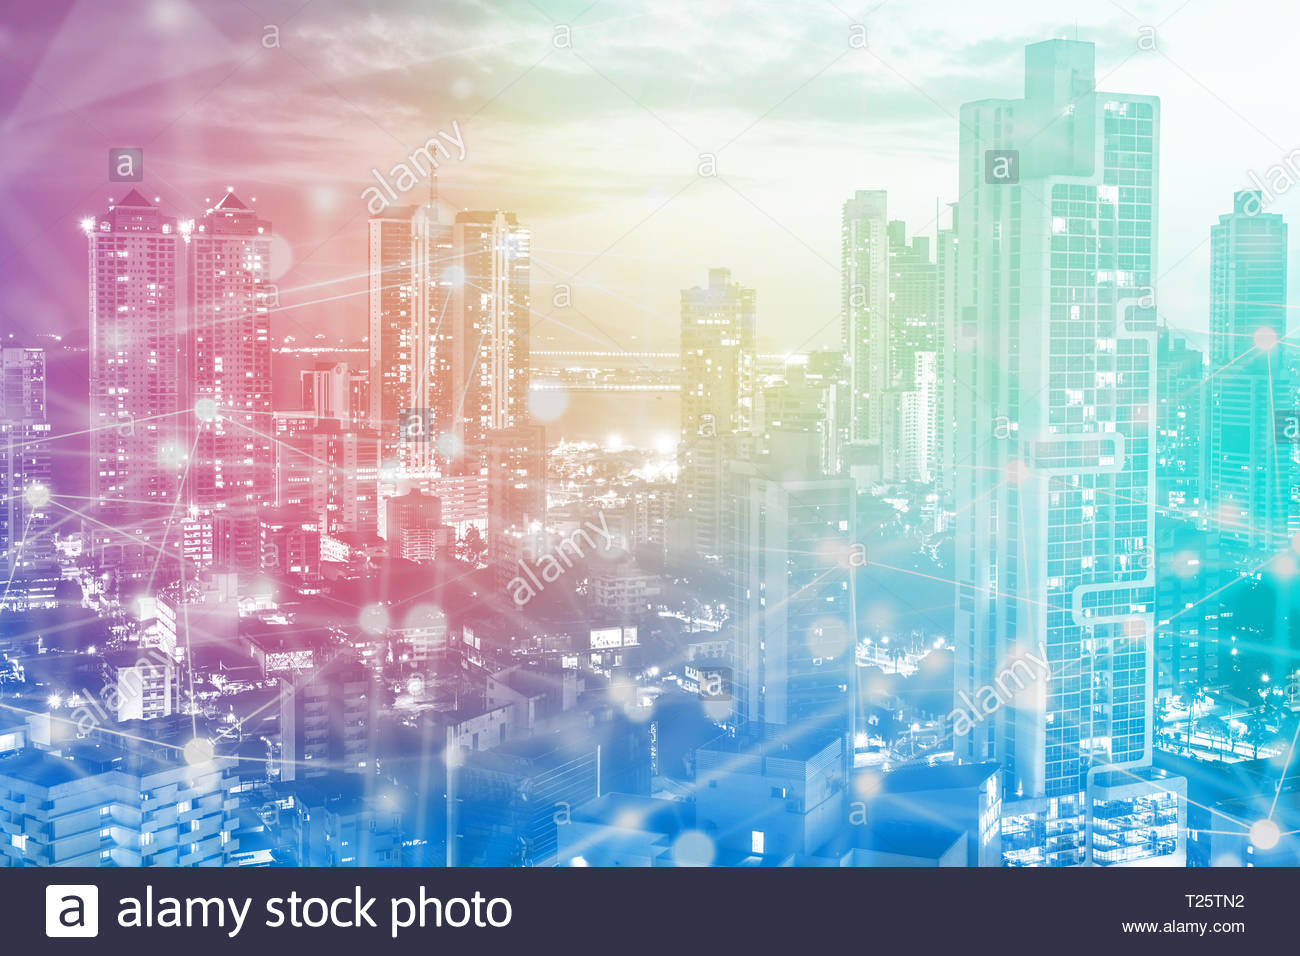 Work Illustration With City Skyline Abstract Technoloy